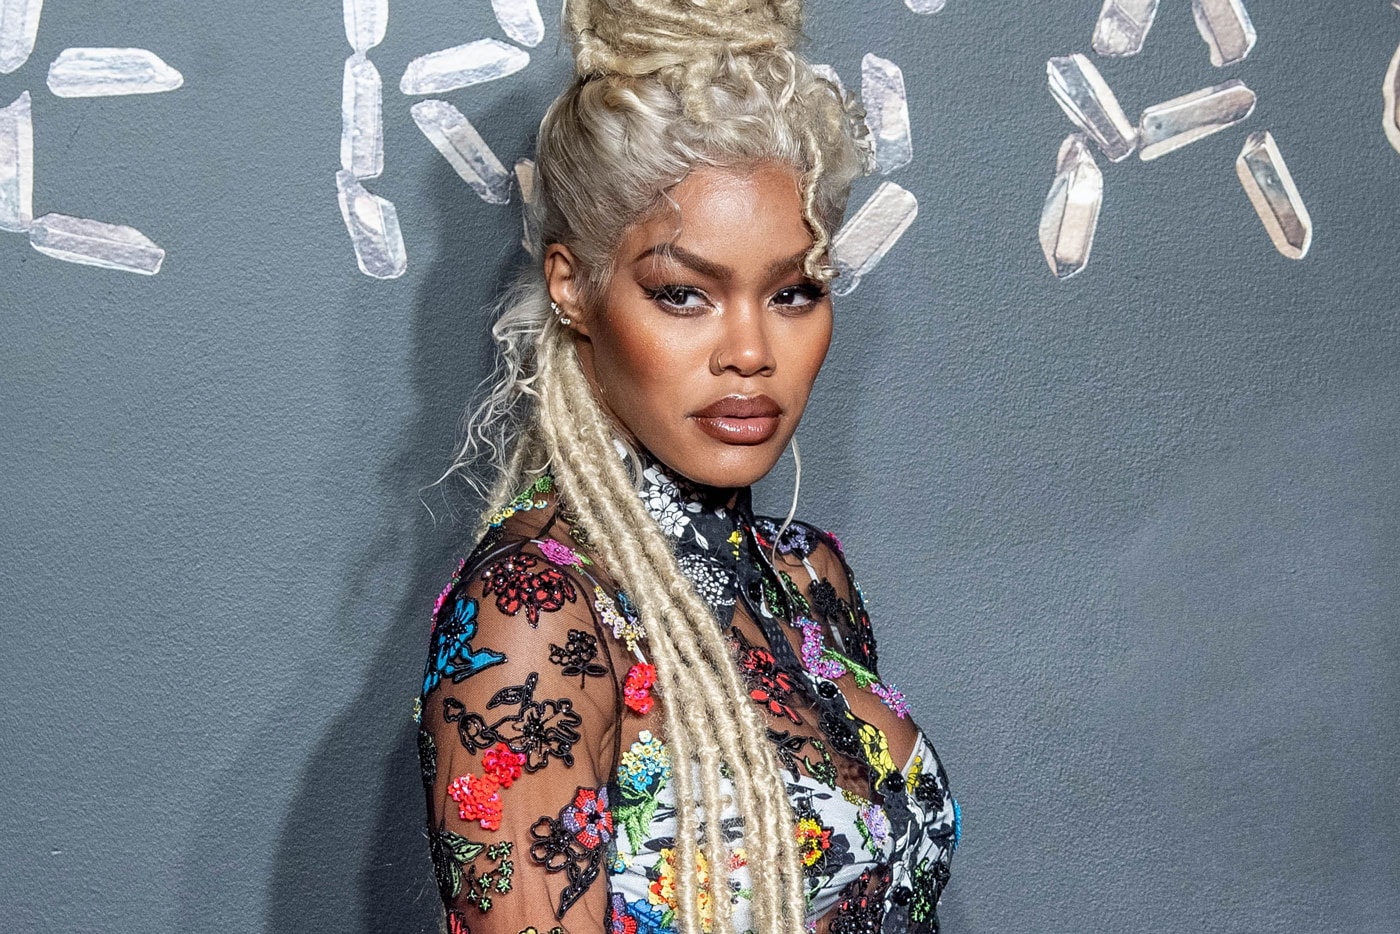 Teyana Taylor Joins VH1’s 'The Breaks' & 'Hip Hop Squares' After Starring in Kanye West's "Fade" Video